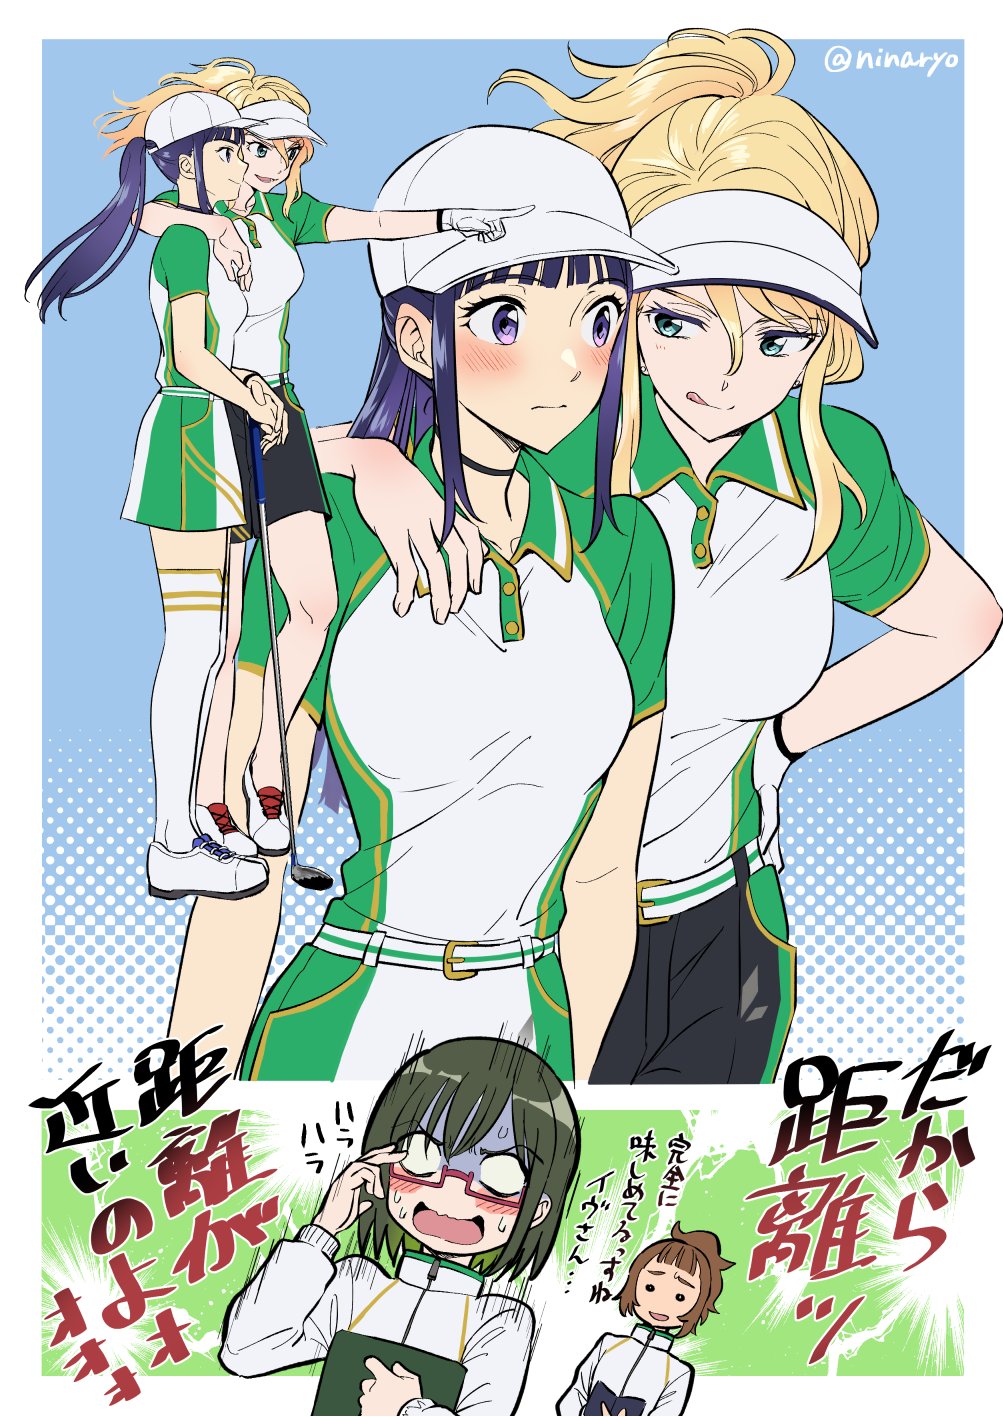 4girls amawashi_aoi arm_around_shoulder artist_name birdie_wing:_golf_girls'_story blank_eyes blonde_hair blue_background blue_hair blush brown_hair choker eve_(birdie_wing) full_body glasses gloves golf_club green_eyes greyscale highres licking_lips long_hair looking_at_another monochrome multiple_girls multiple_views niina_ryou open_mouth pointing ponytail saotome_ichina shinjou_amane shoes short_hair shorts simple_background sneakers surprised sweat thigh-highs tongue tongue_out violet_eyes visor_cap yuri